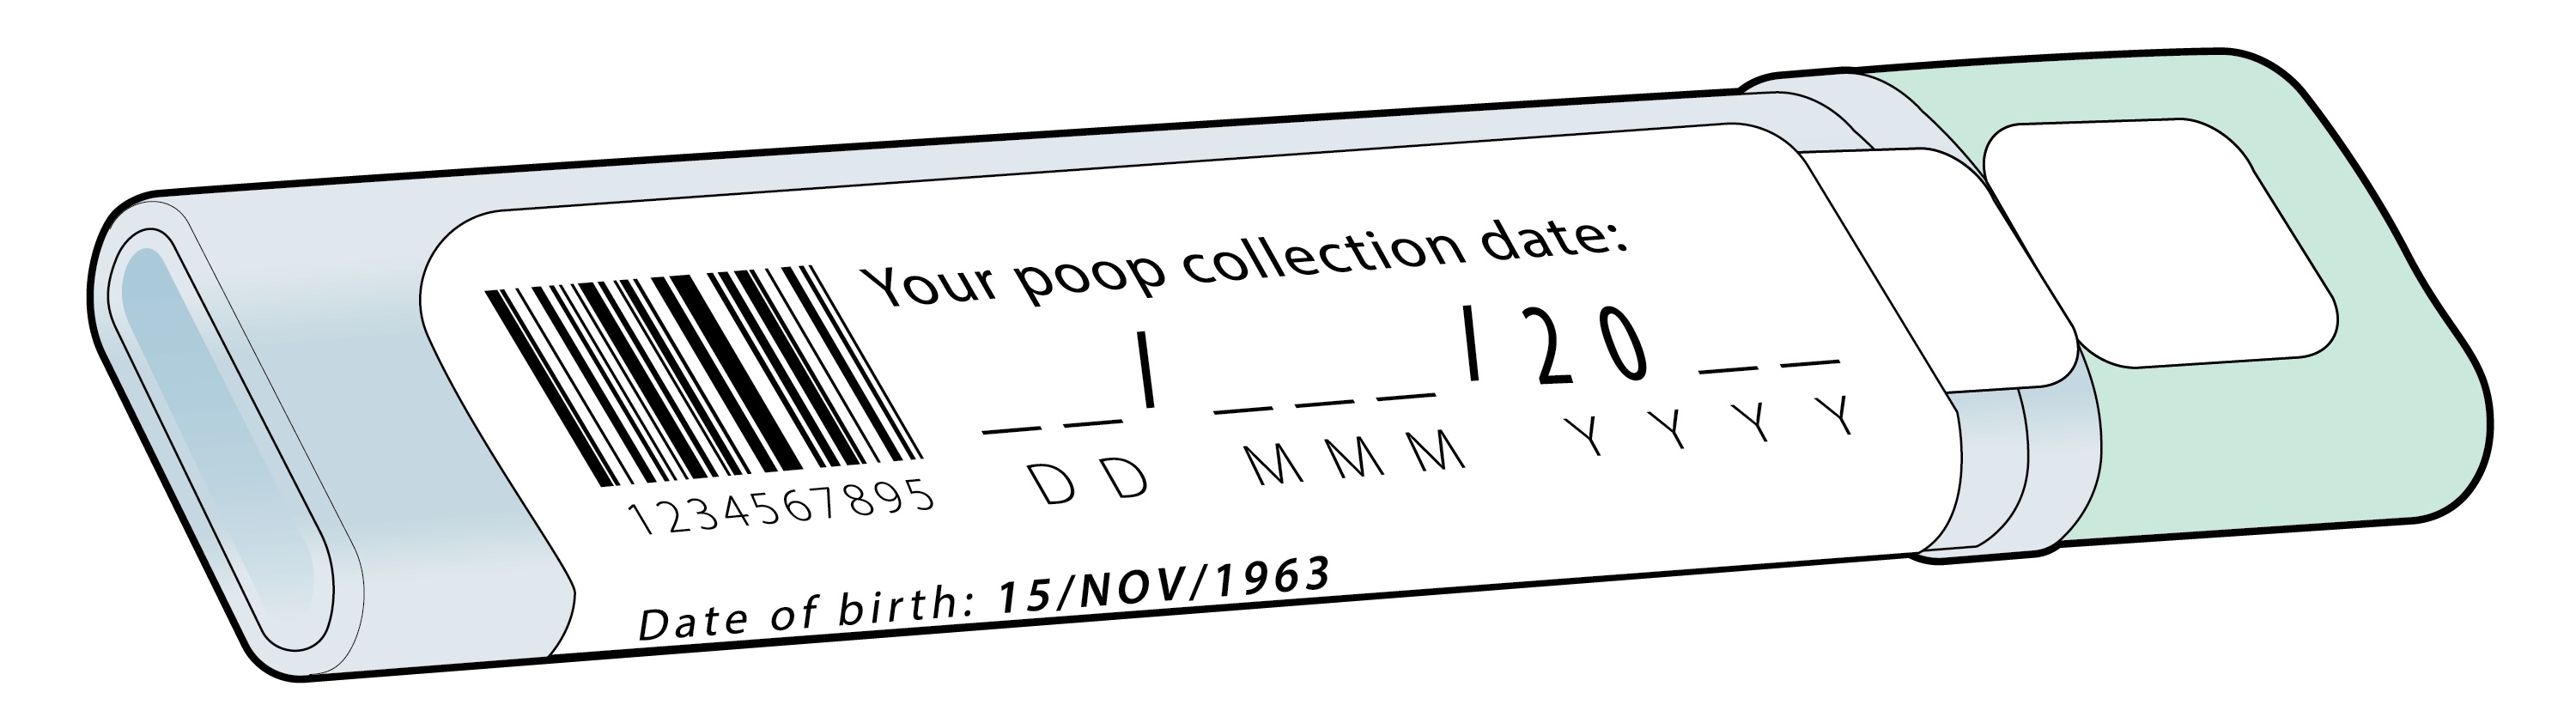 Fecal collection tool